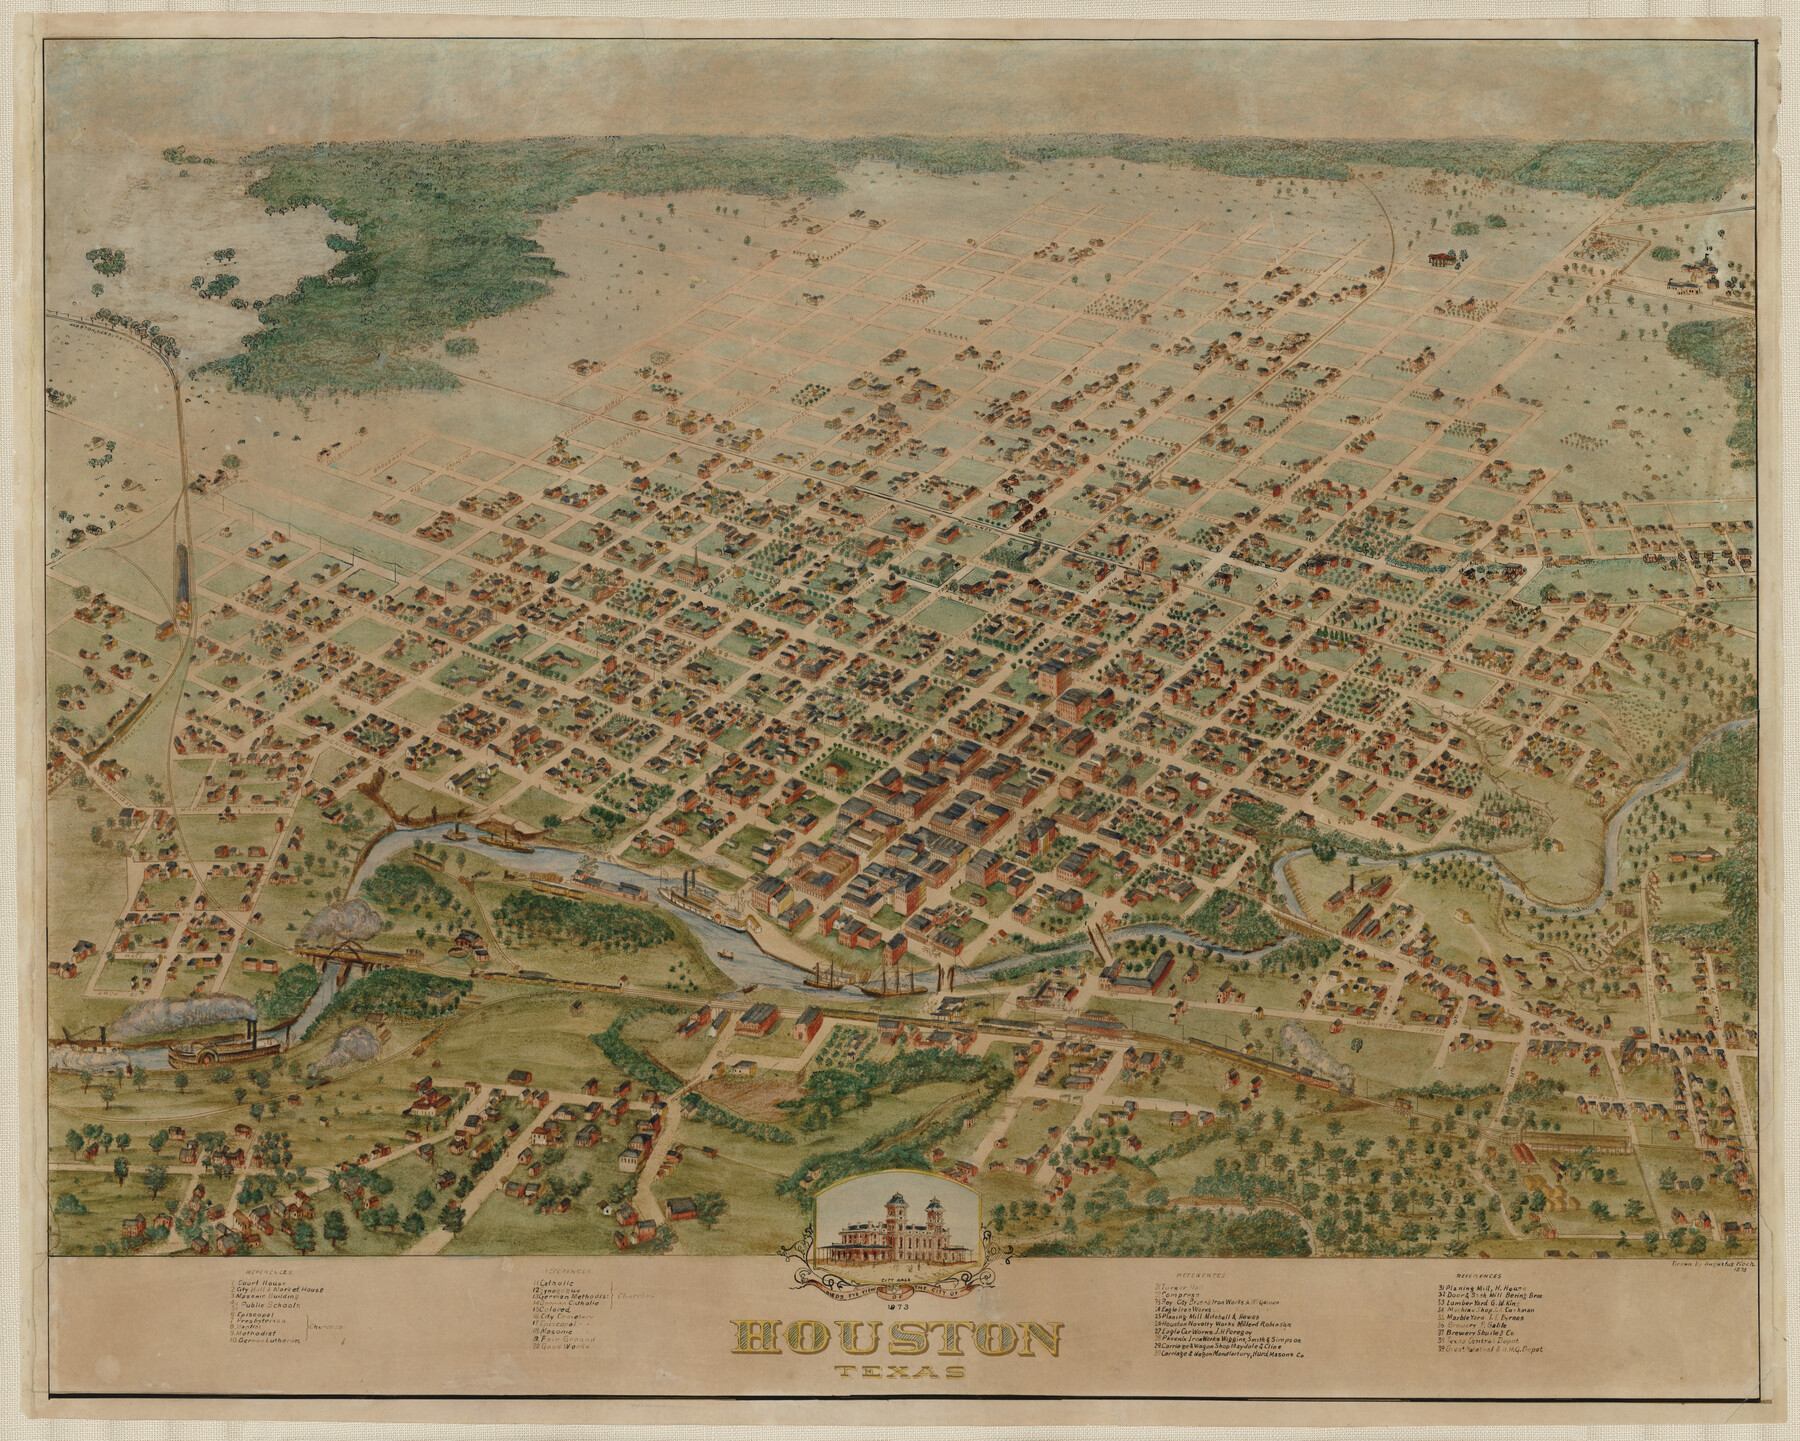 93908, Bird's Eye View of the City of Houston, Texas, Holcomb Digital Map Collection